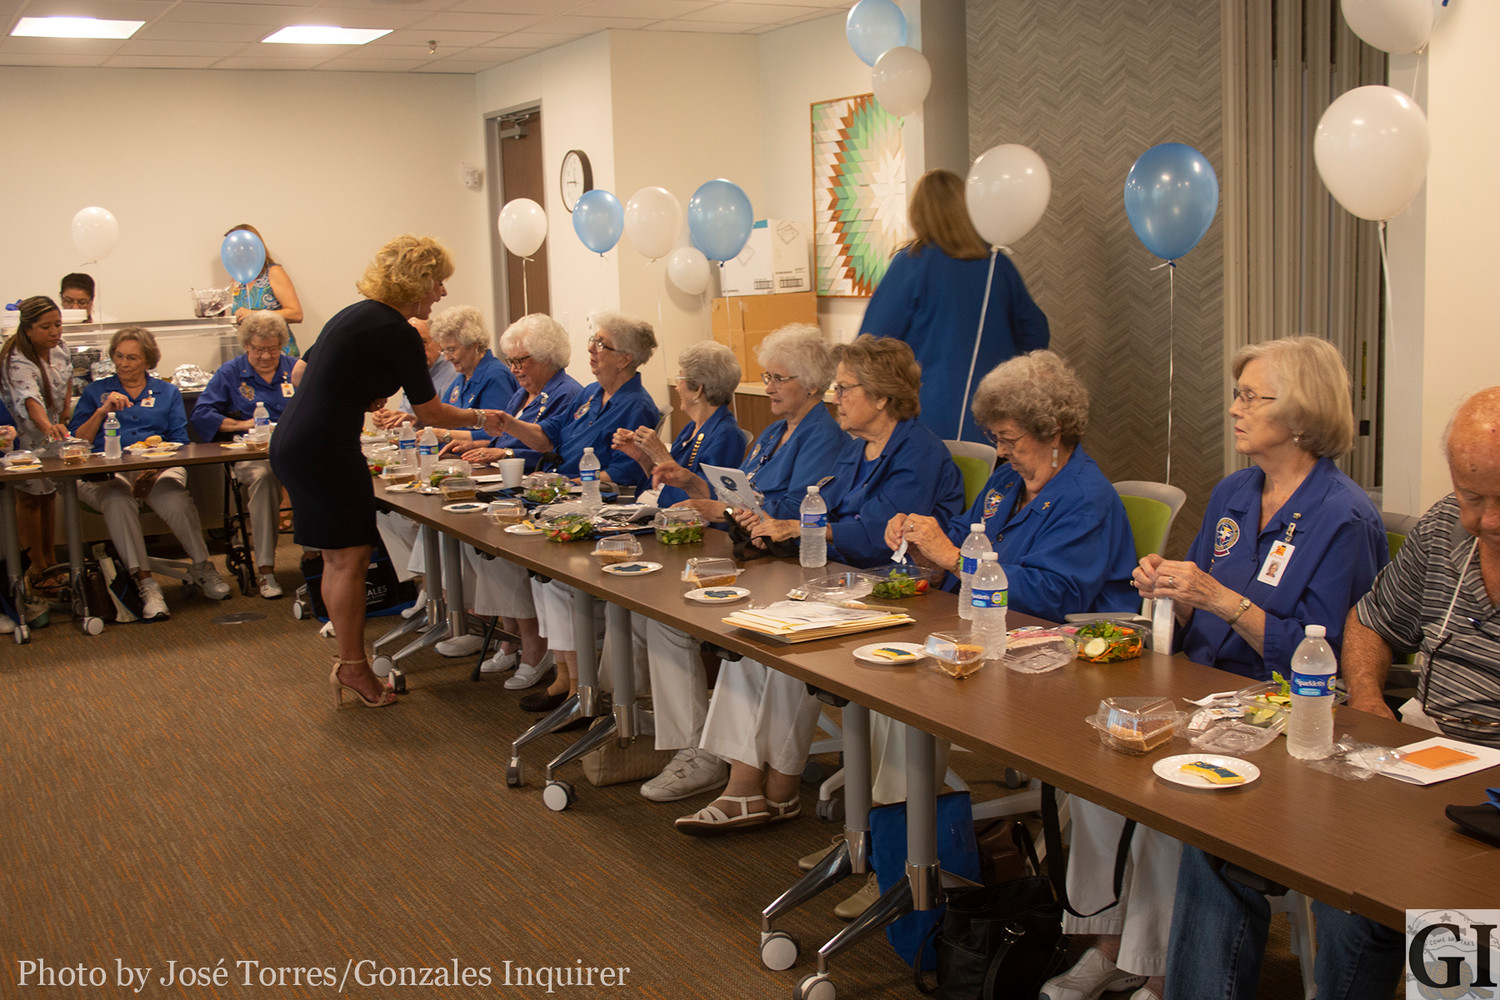 The Gonzales Healthcare Systems celebrated the hospital’s Auxiliary Club with a special luncheon at the annual installation of new officers on Tuesday. The service club surpassed 100,000 service hours volunteering for the hospital and raising funds for a variety of causes, projects and scholarships.